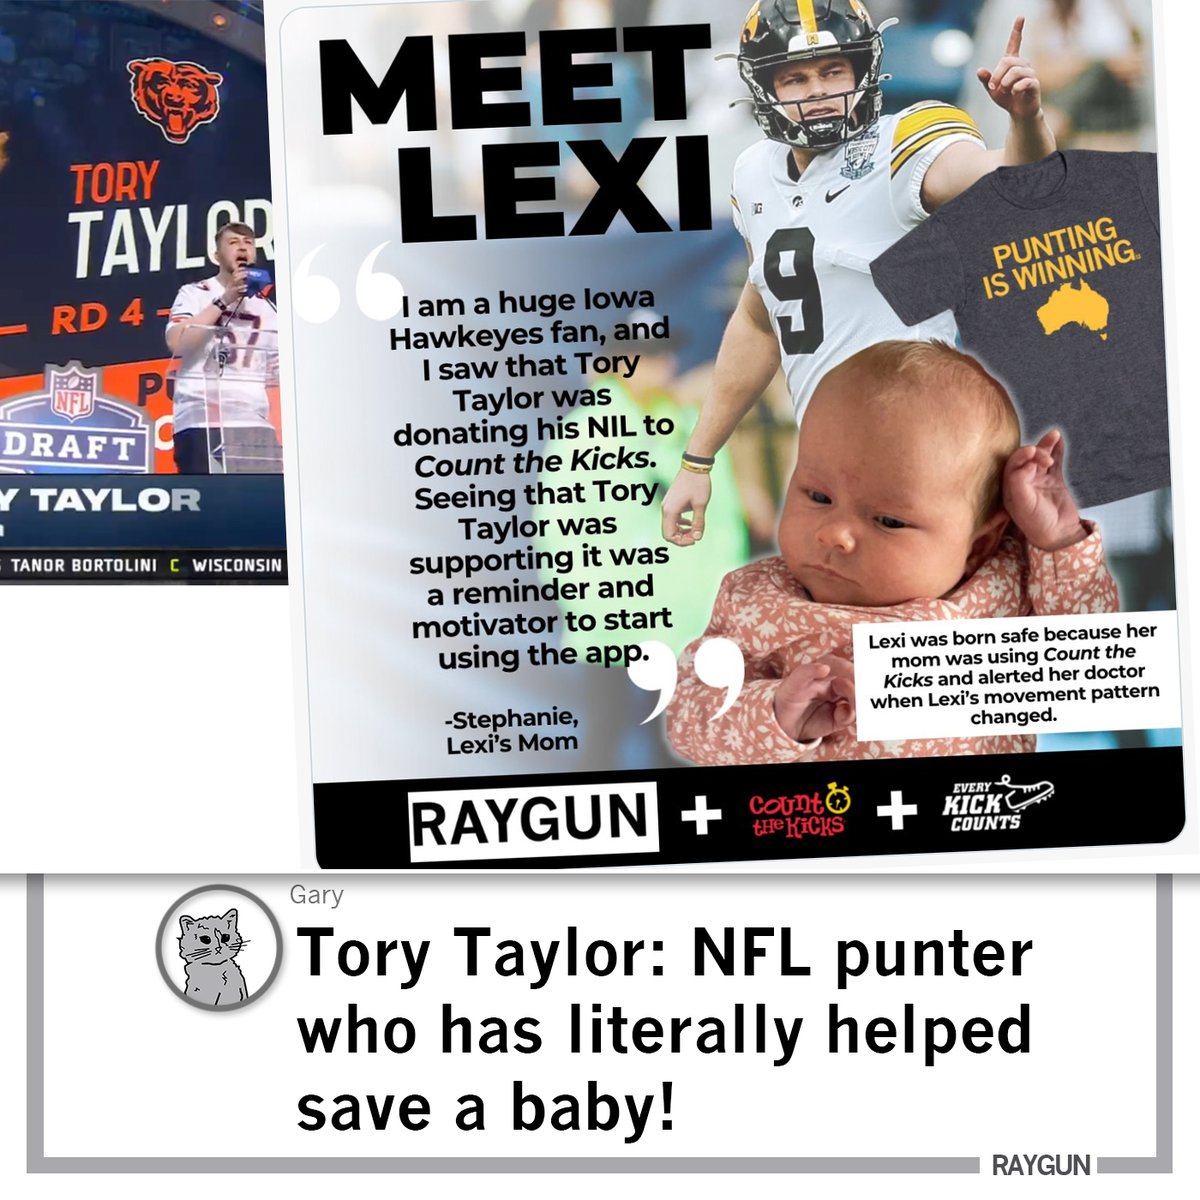 Also: Tory Taylor, the Bears' new punter has literally helped save babies! WHAT'S NOT TO LIKE?!

He raised thousands of dollars for @CounttheKicksUS' @EK_Counts program that helps prevent stillbirth and miscarriage through tracking of fetal movements. #raygun